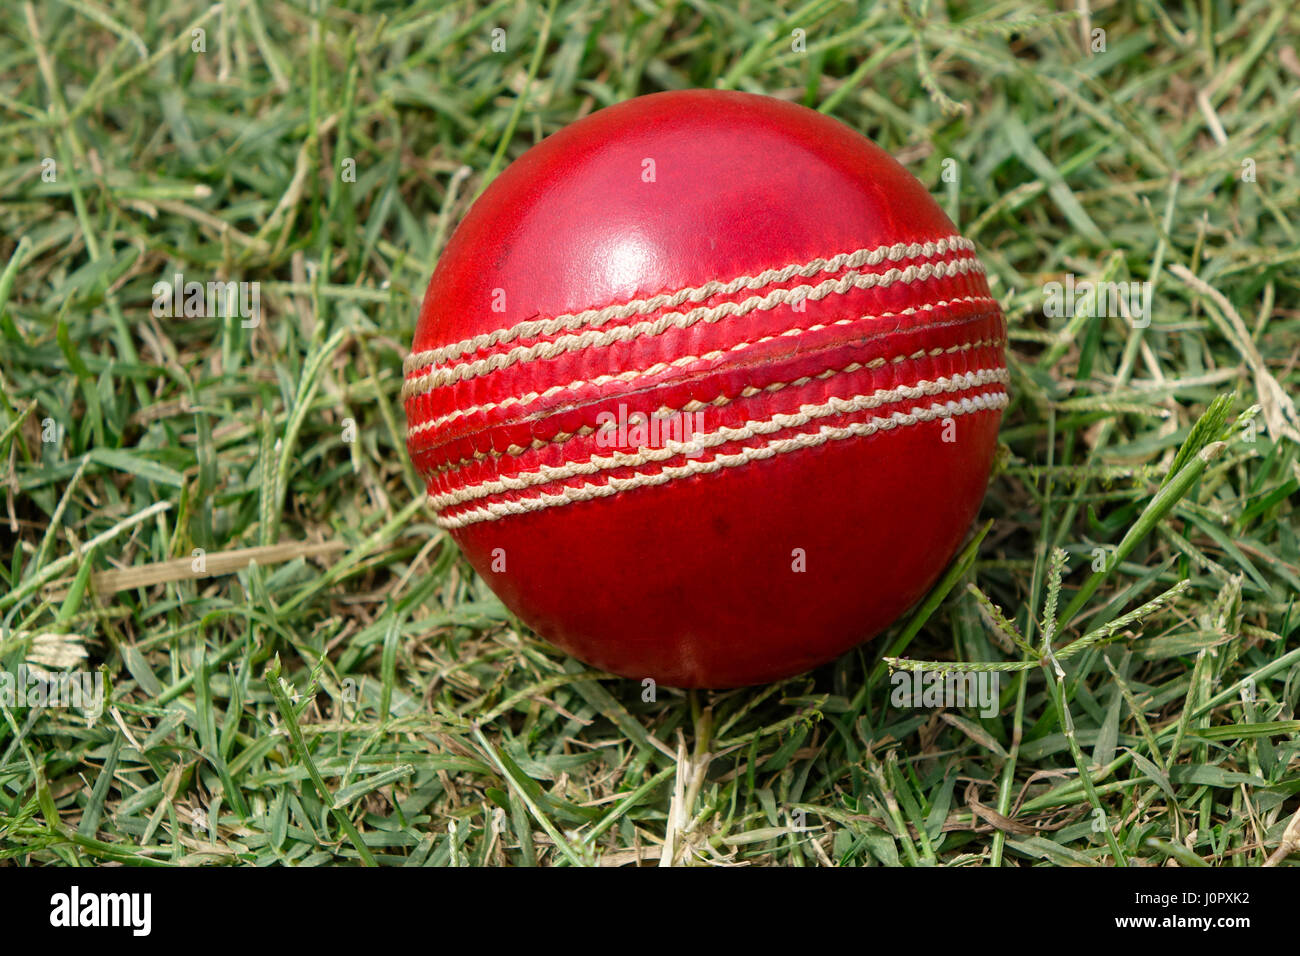 A brand new red Cricket ball with white stitches in green grasses Stock Photo